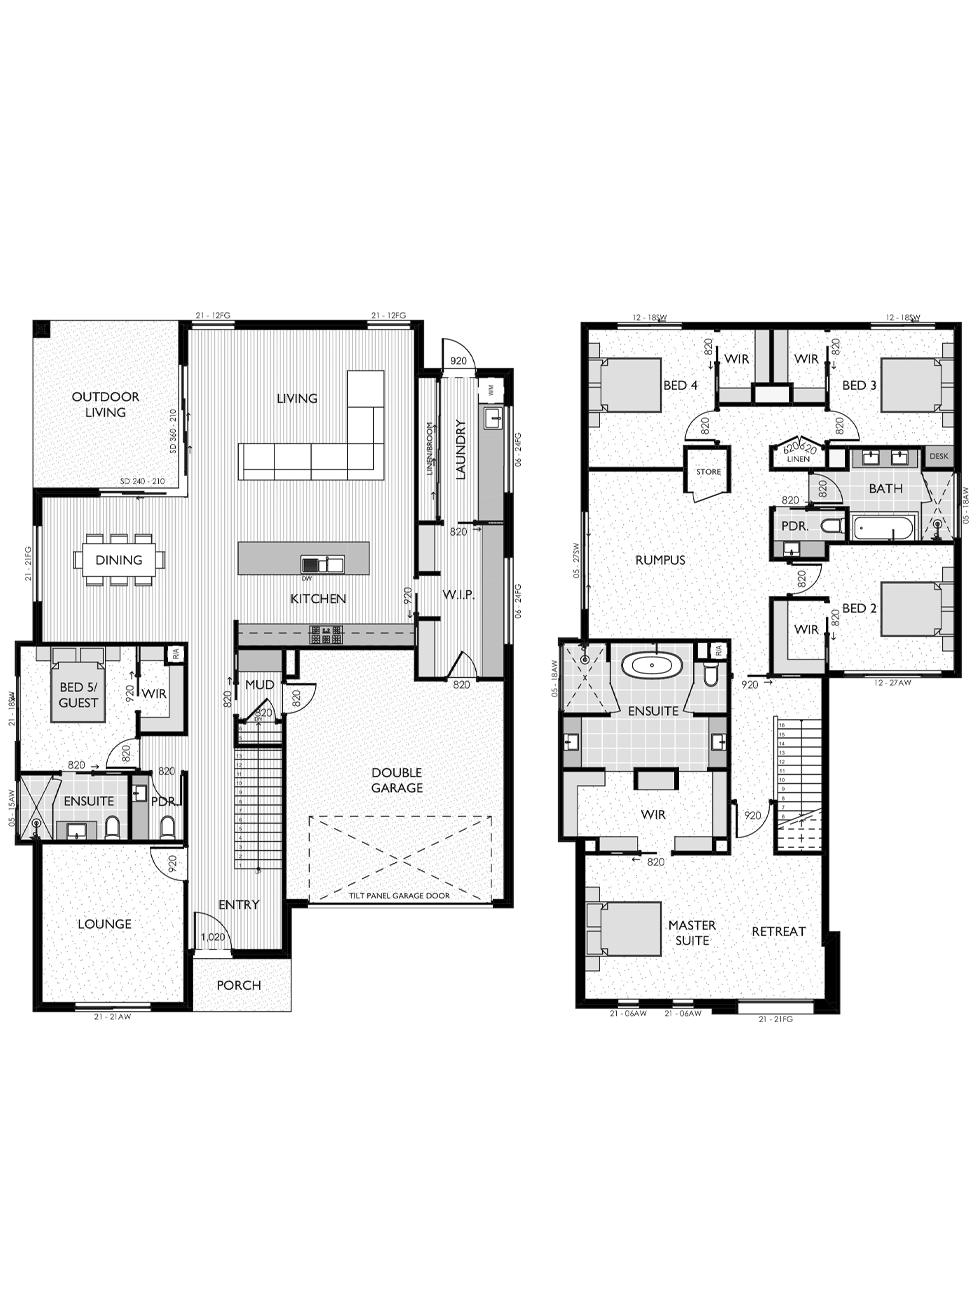 two story home floor plans